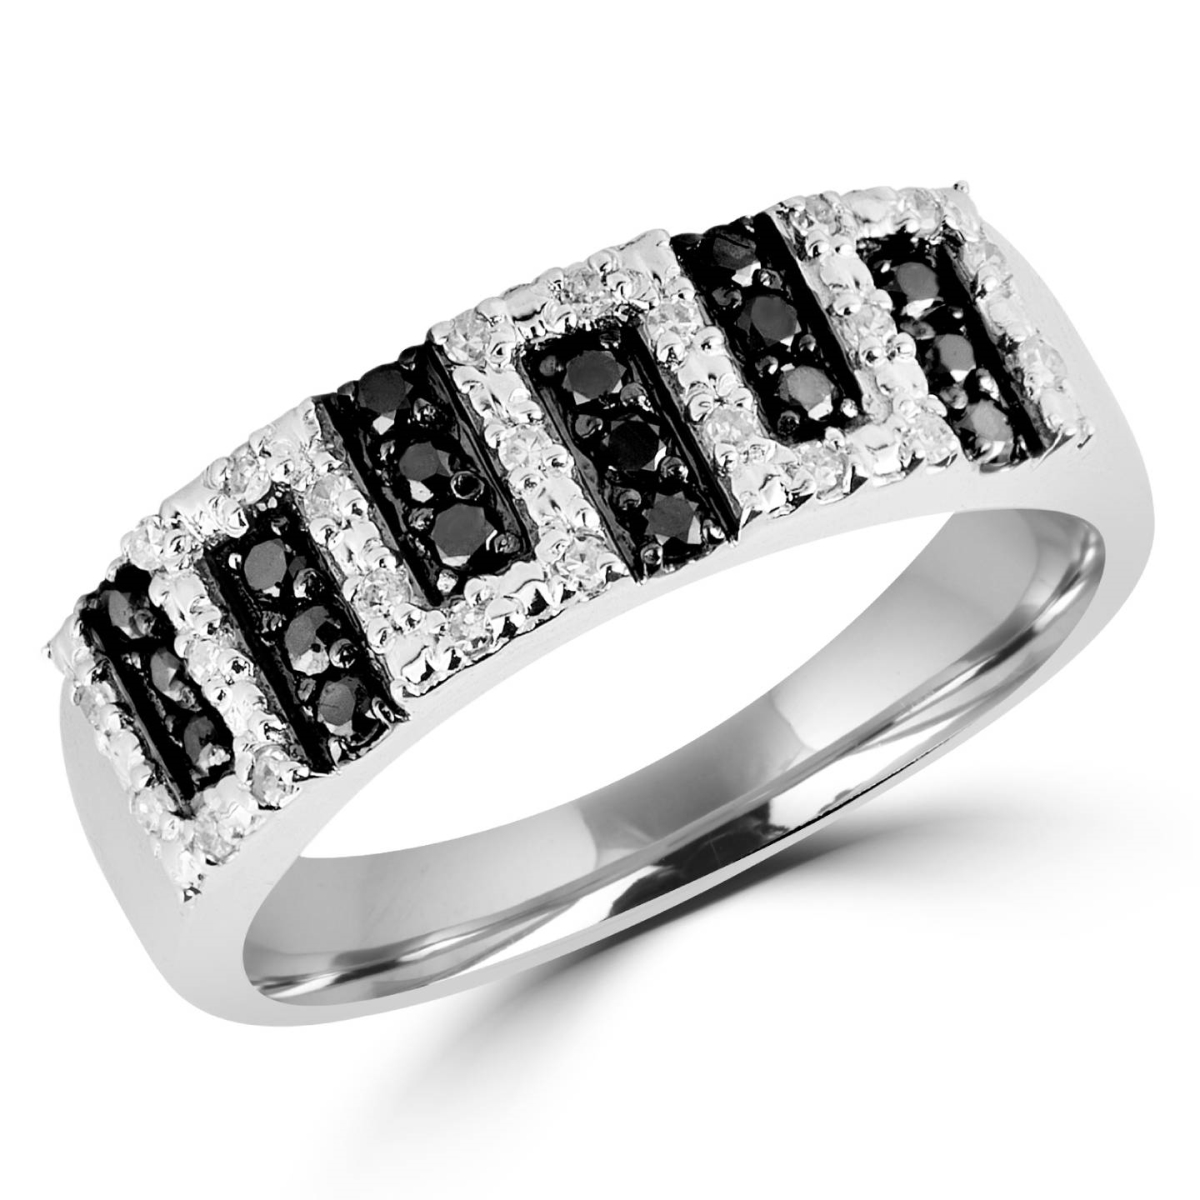 Picture for category White Gold Diamond Rings